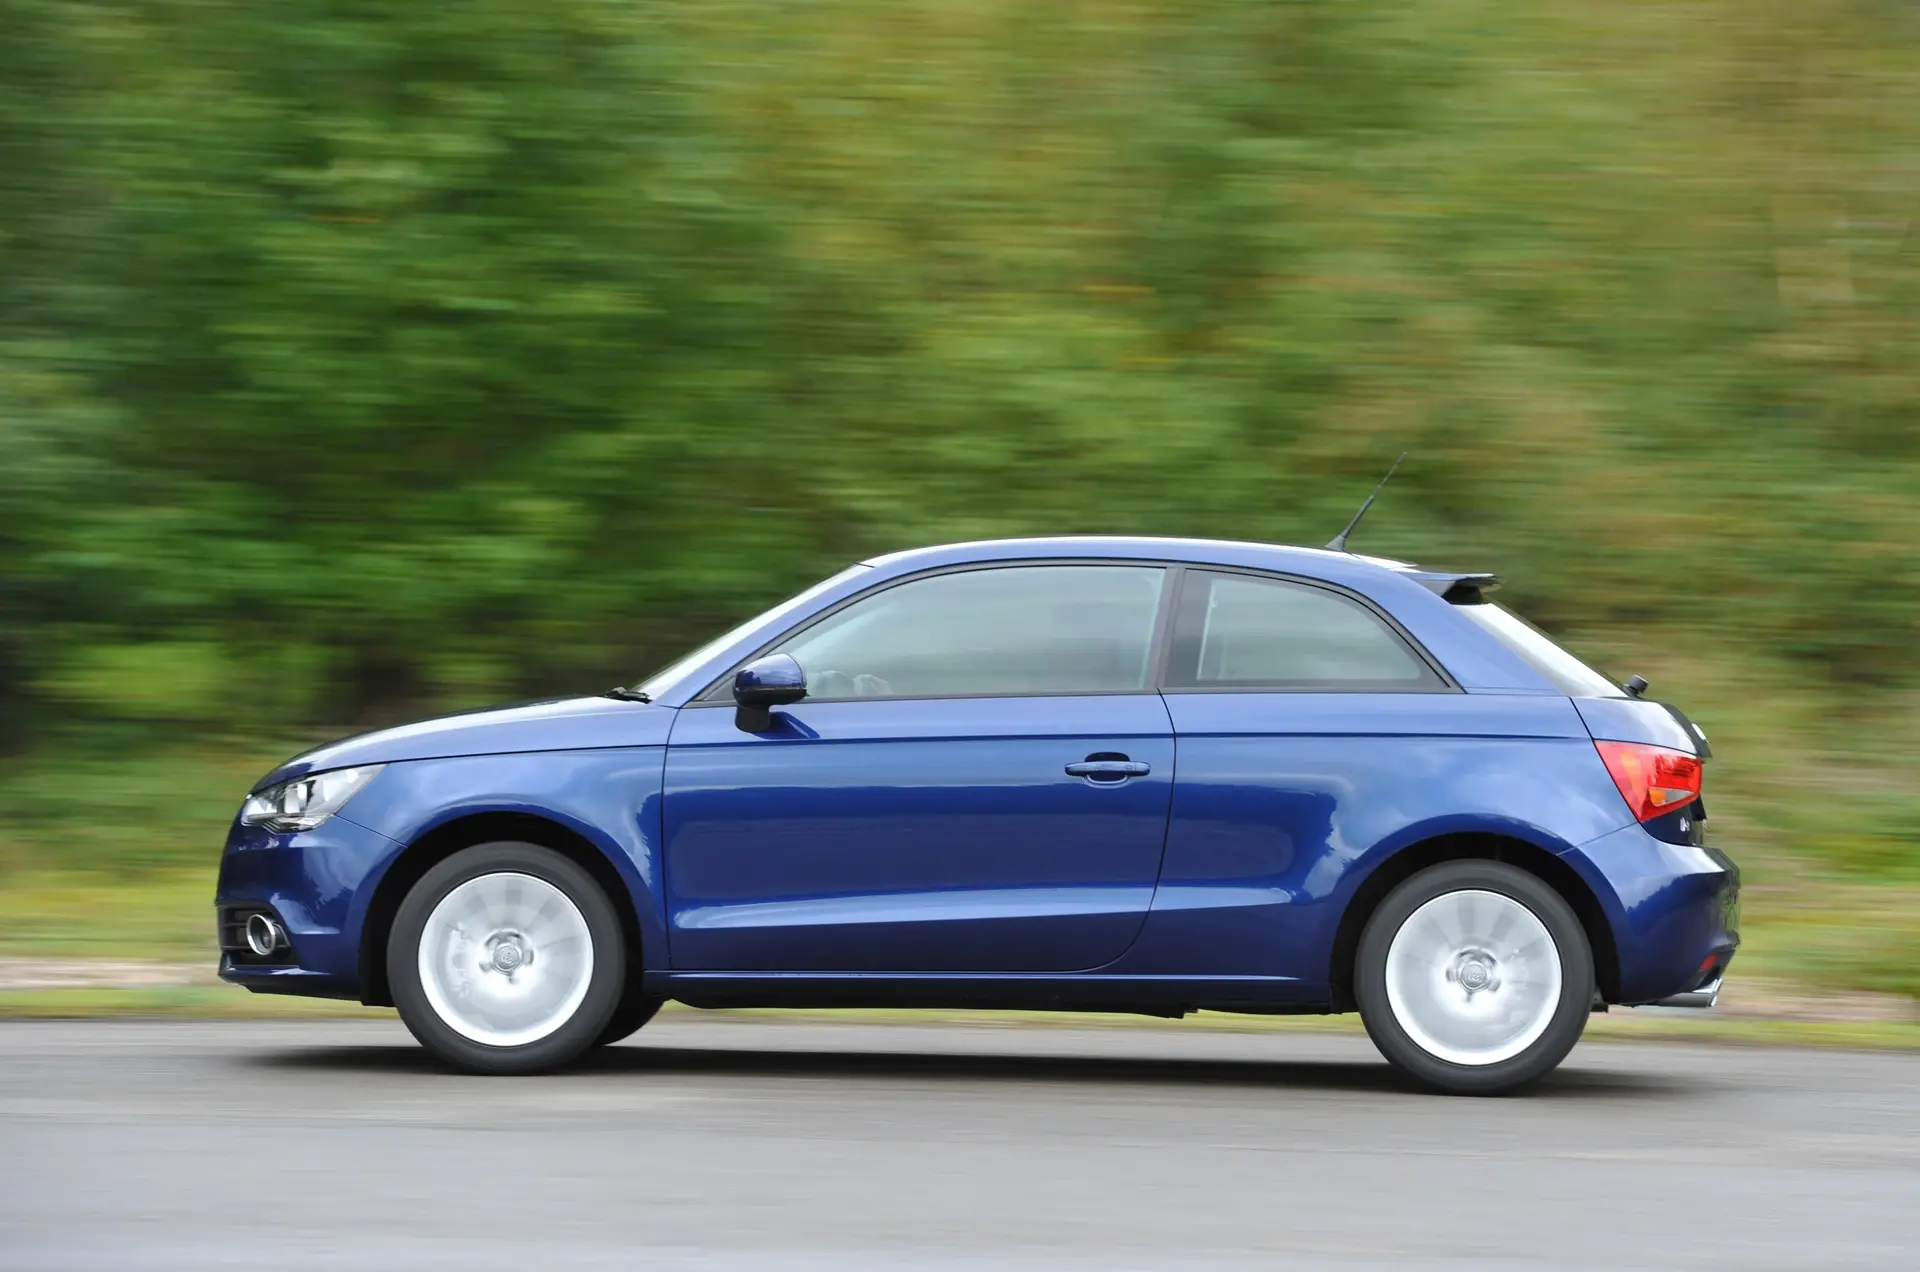 Audi A1 (2010-2018) Review: exterior side photo of the Audi A1 on the road